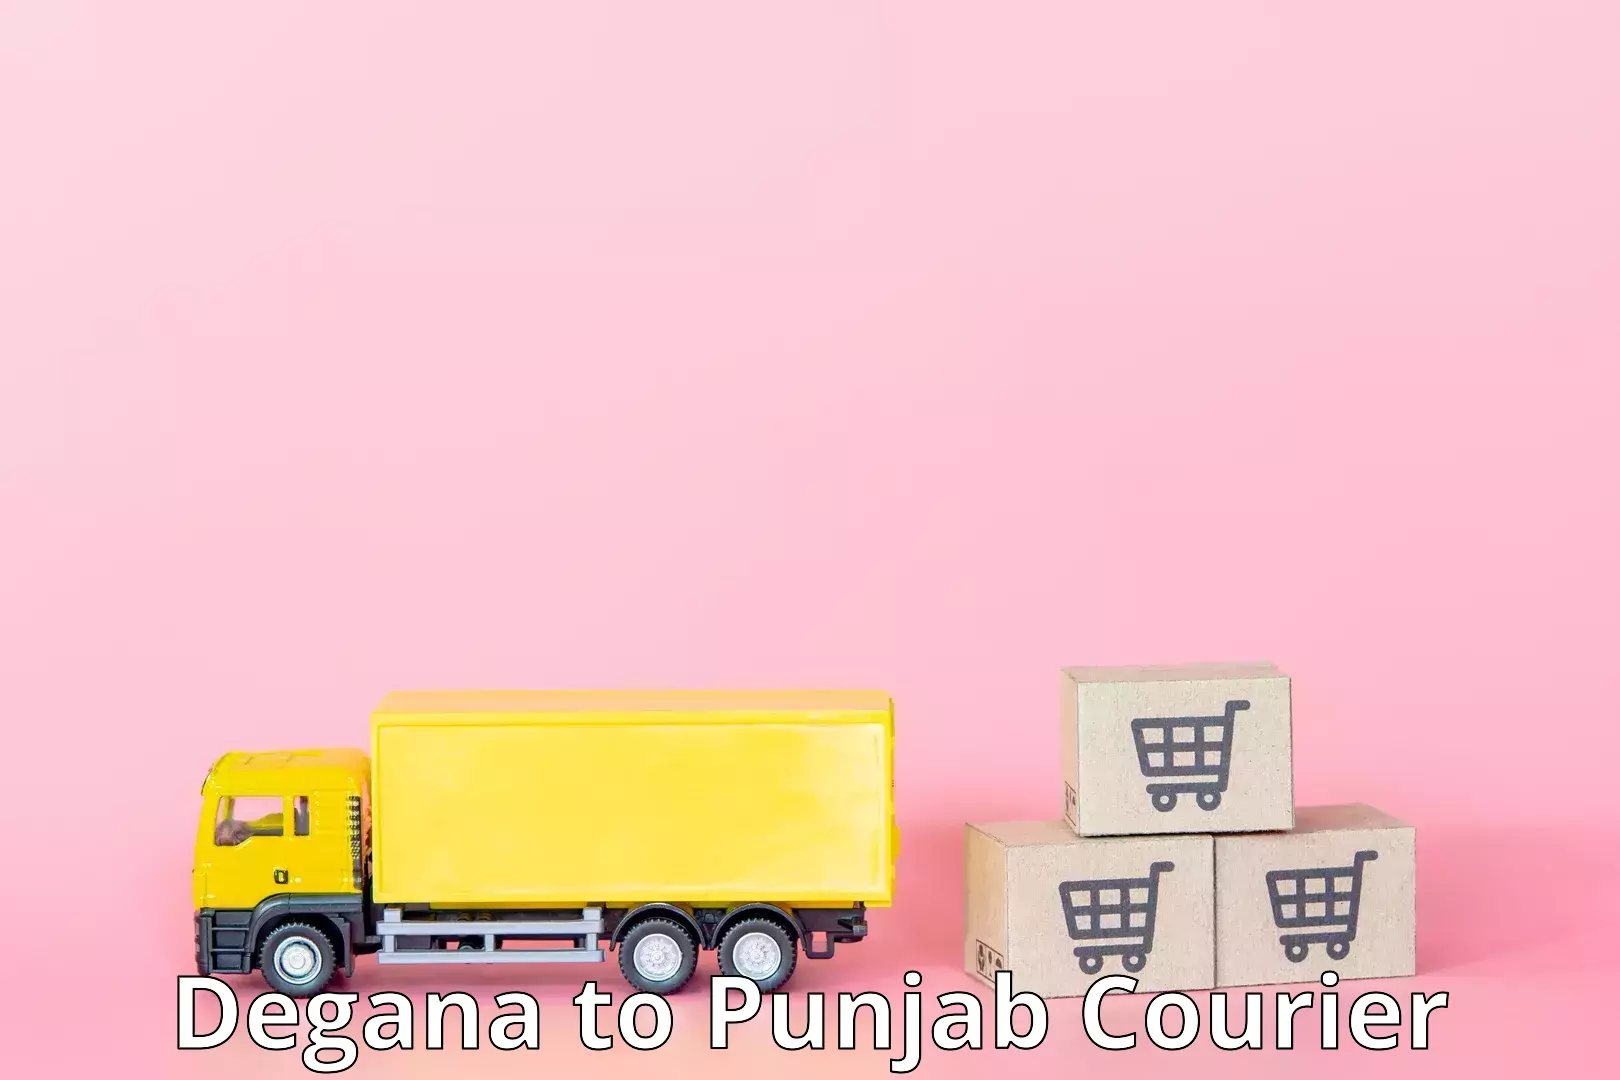 Sustainable delivery practices in Degana to Punjab